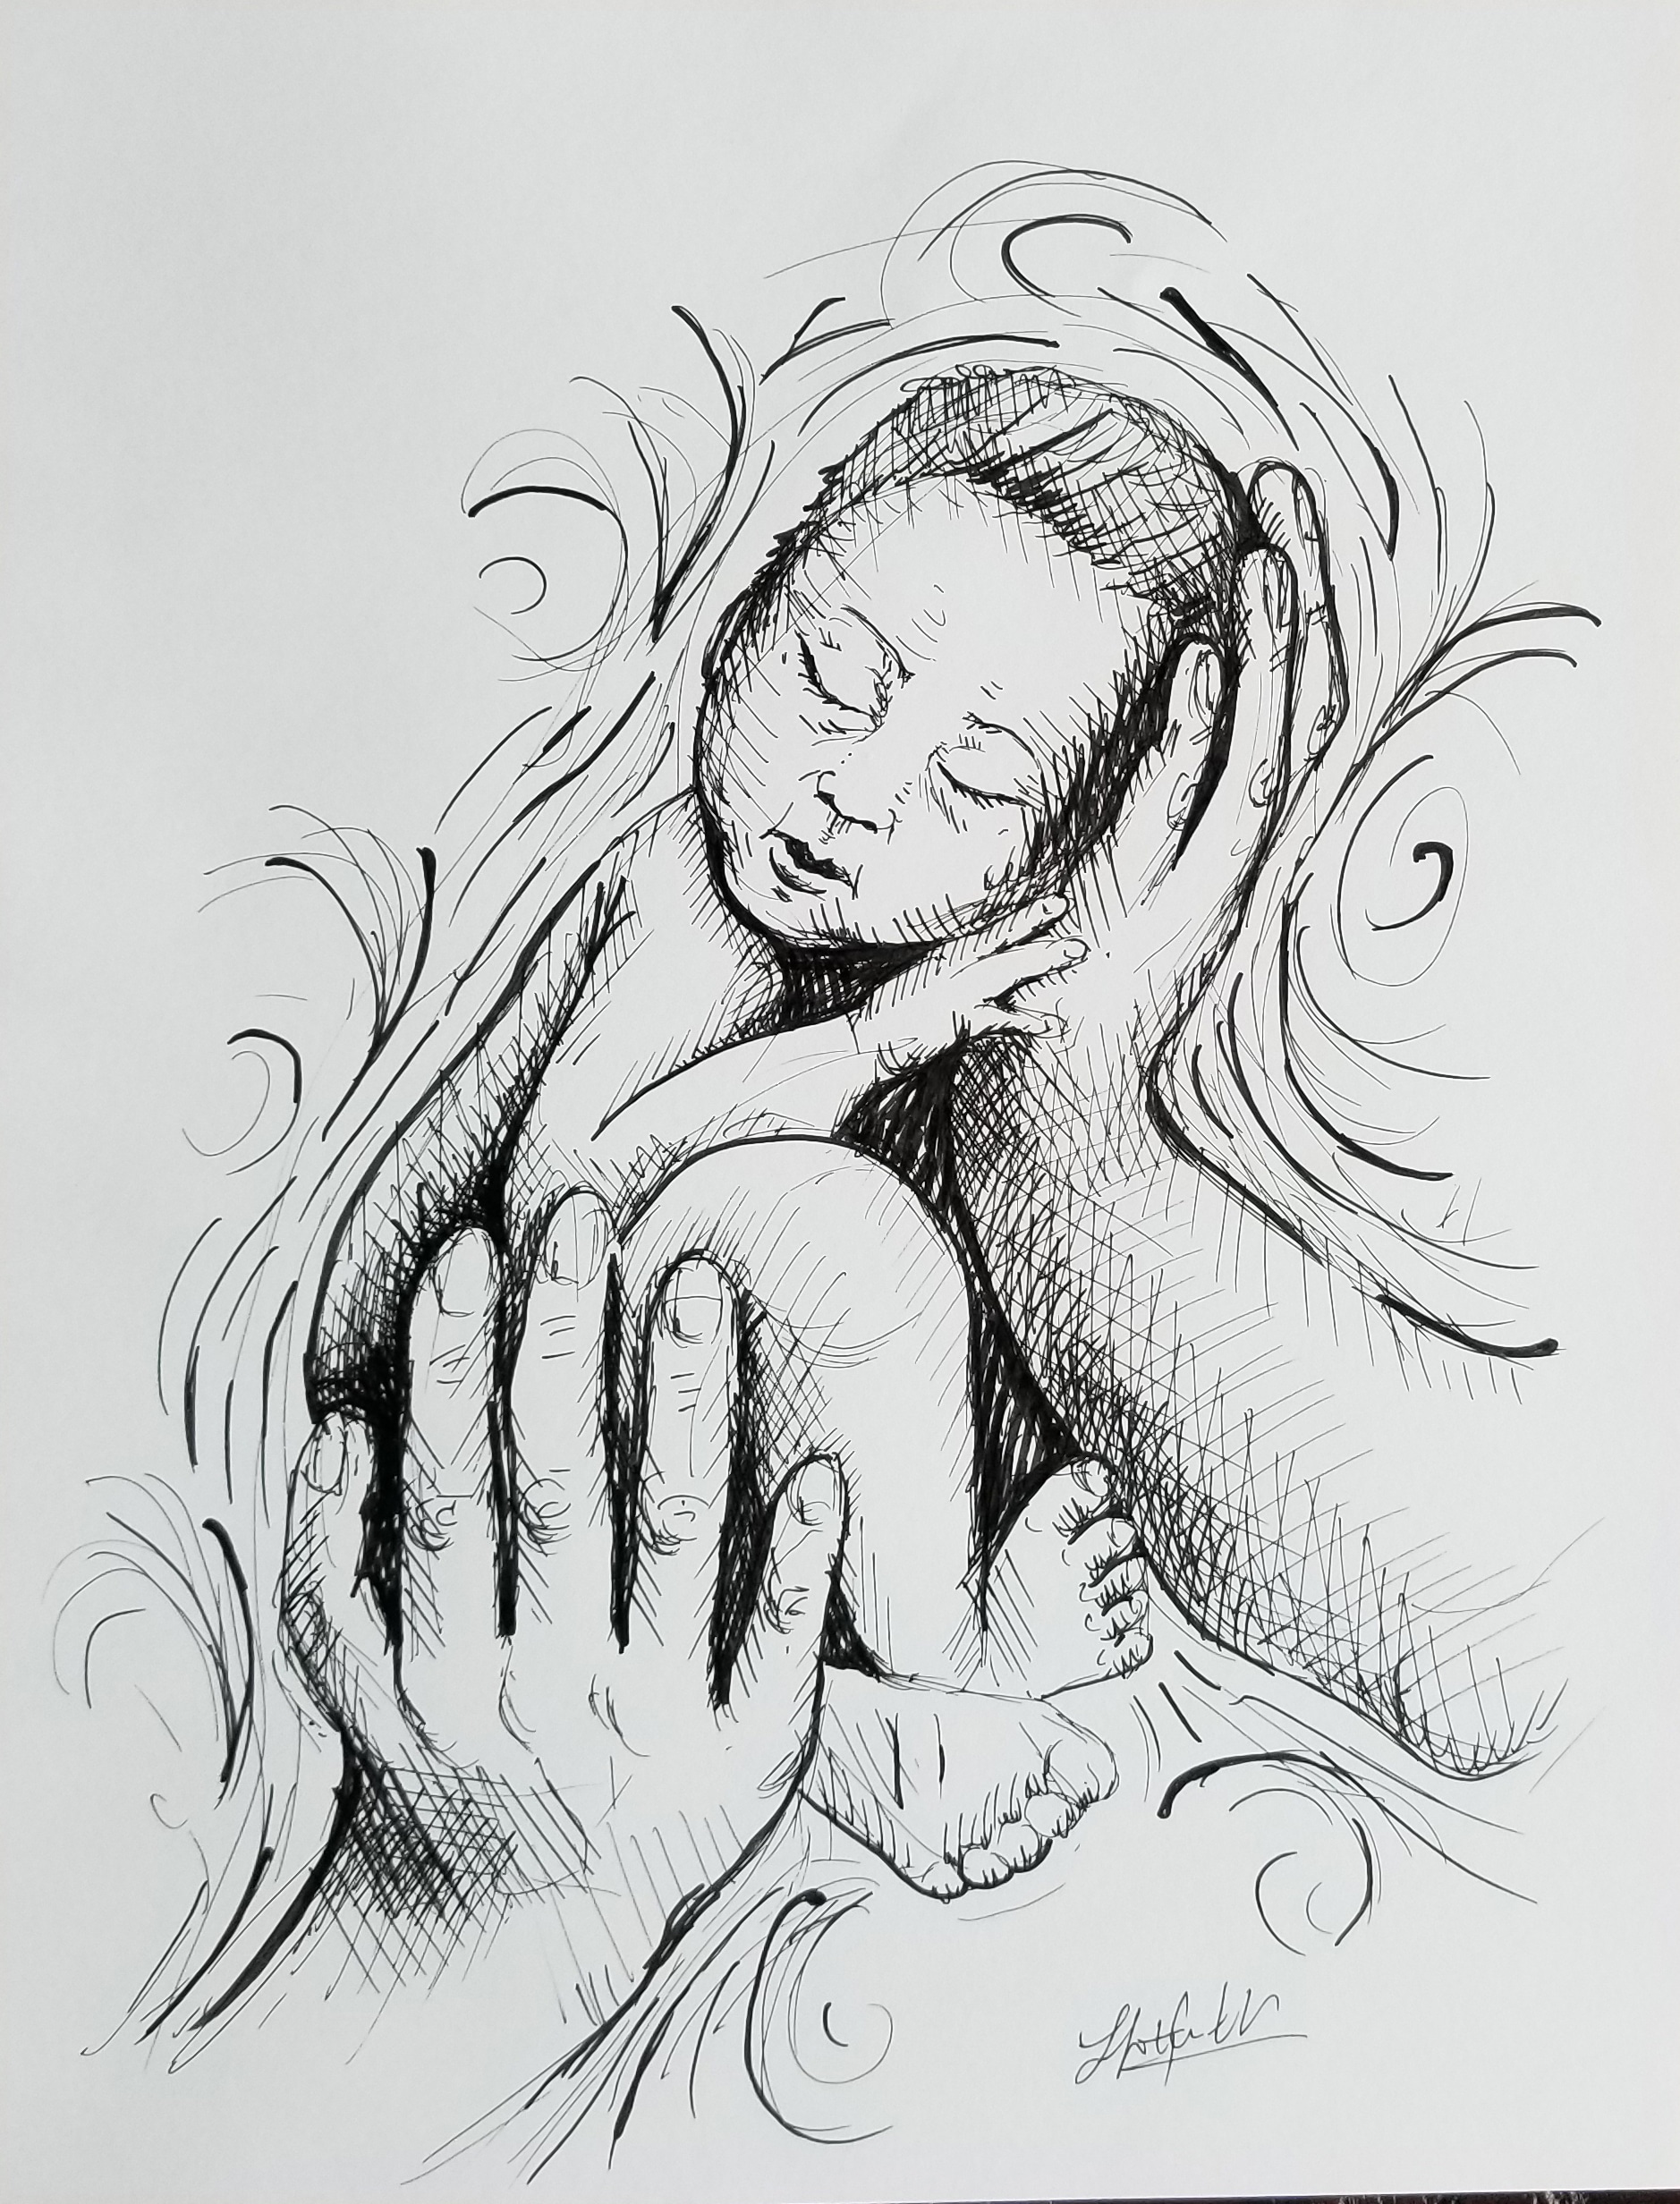 Infant held by loving hands, black-and-white drawing